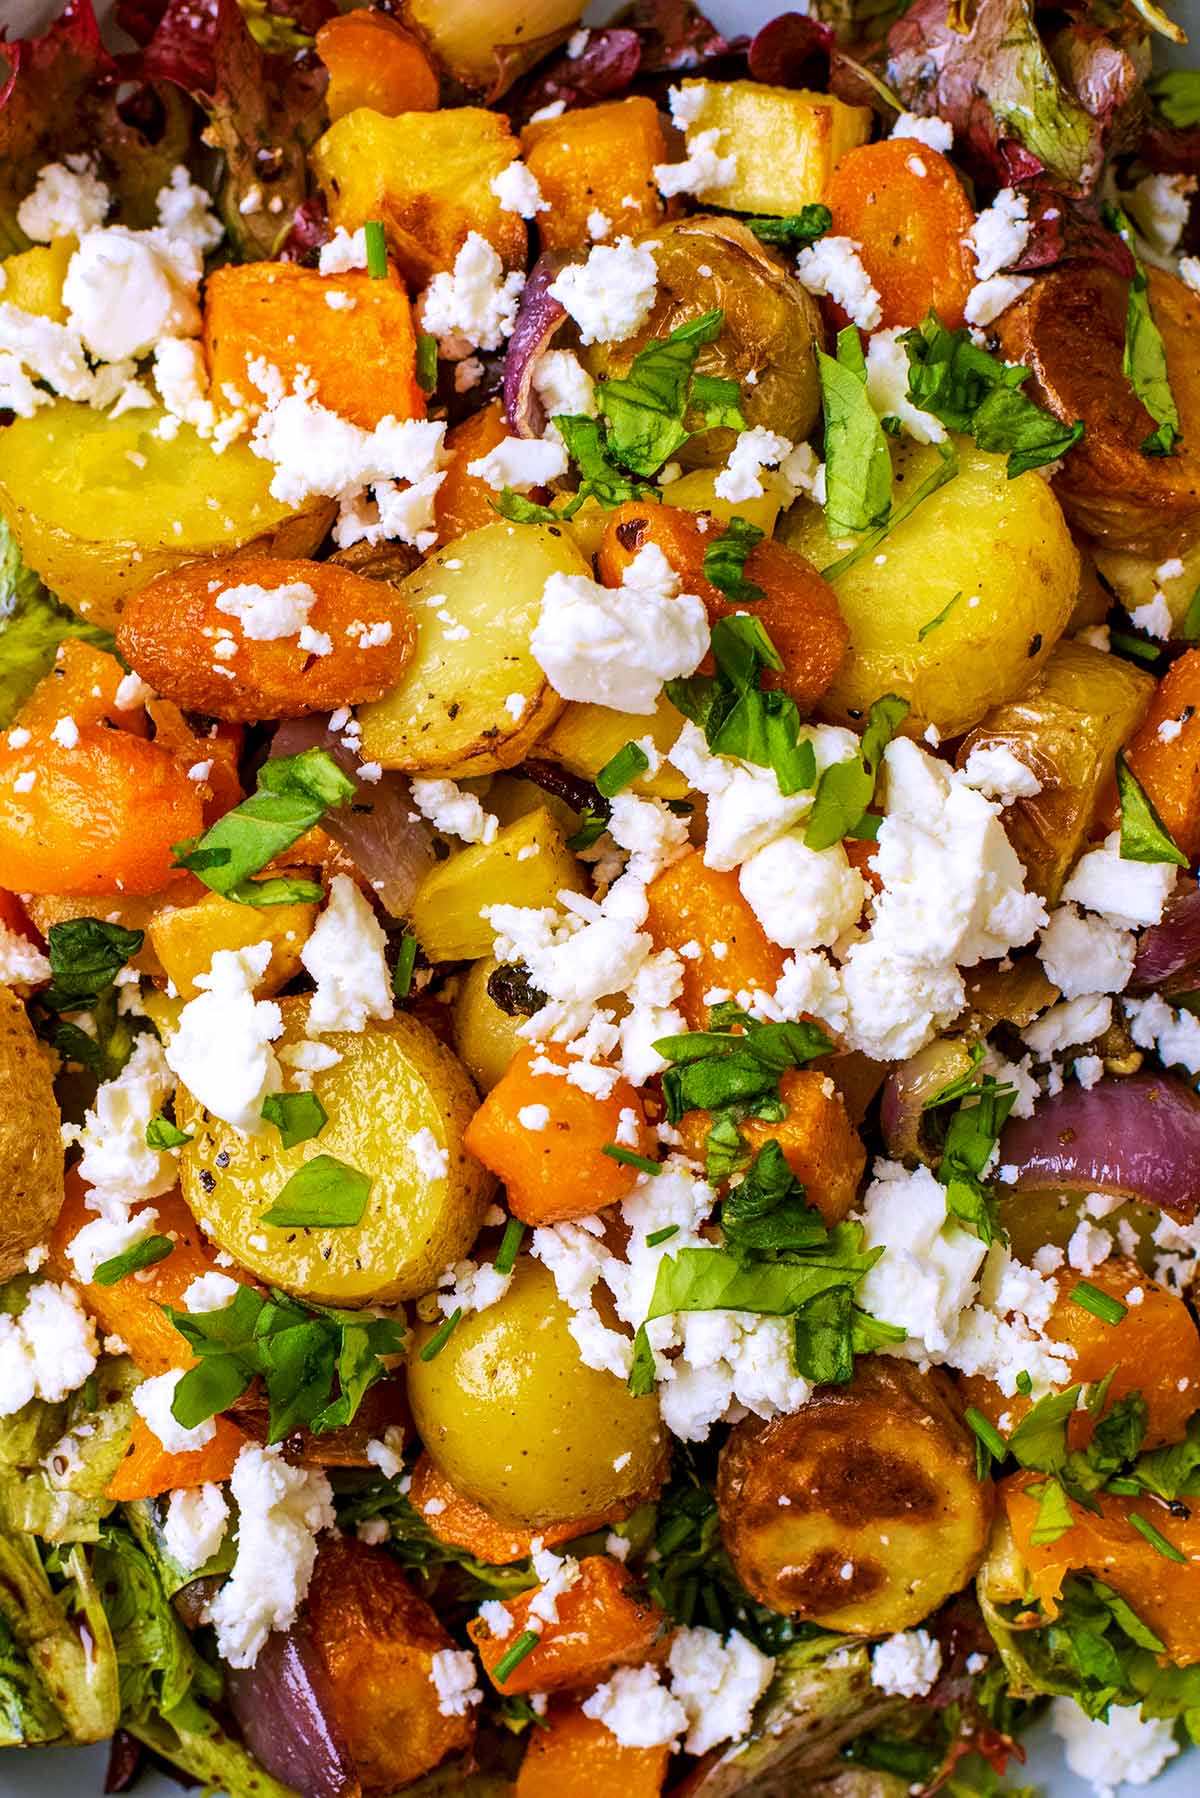 Chopped and roasted potatoes, carrots, parsnips and butternut squash with feta.